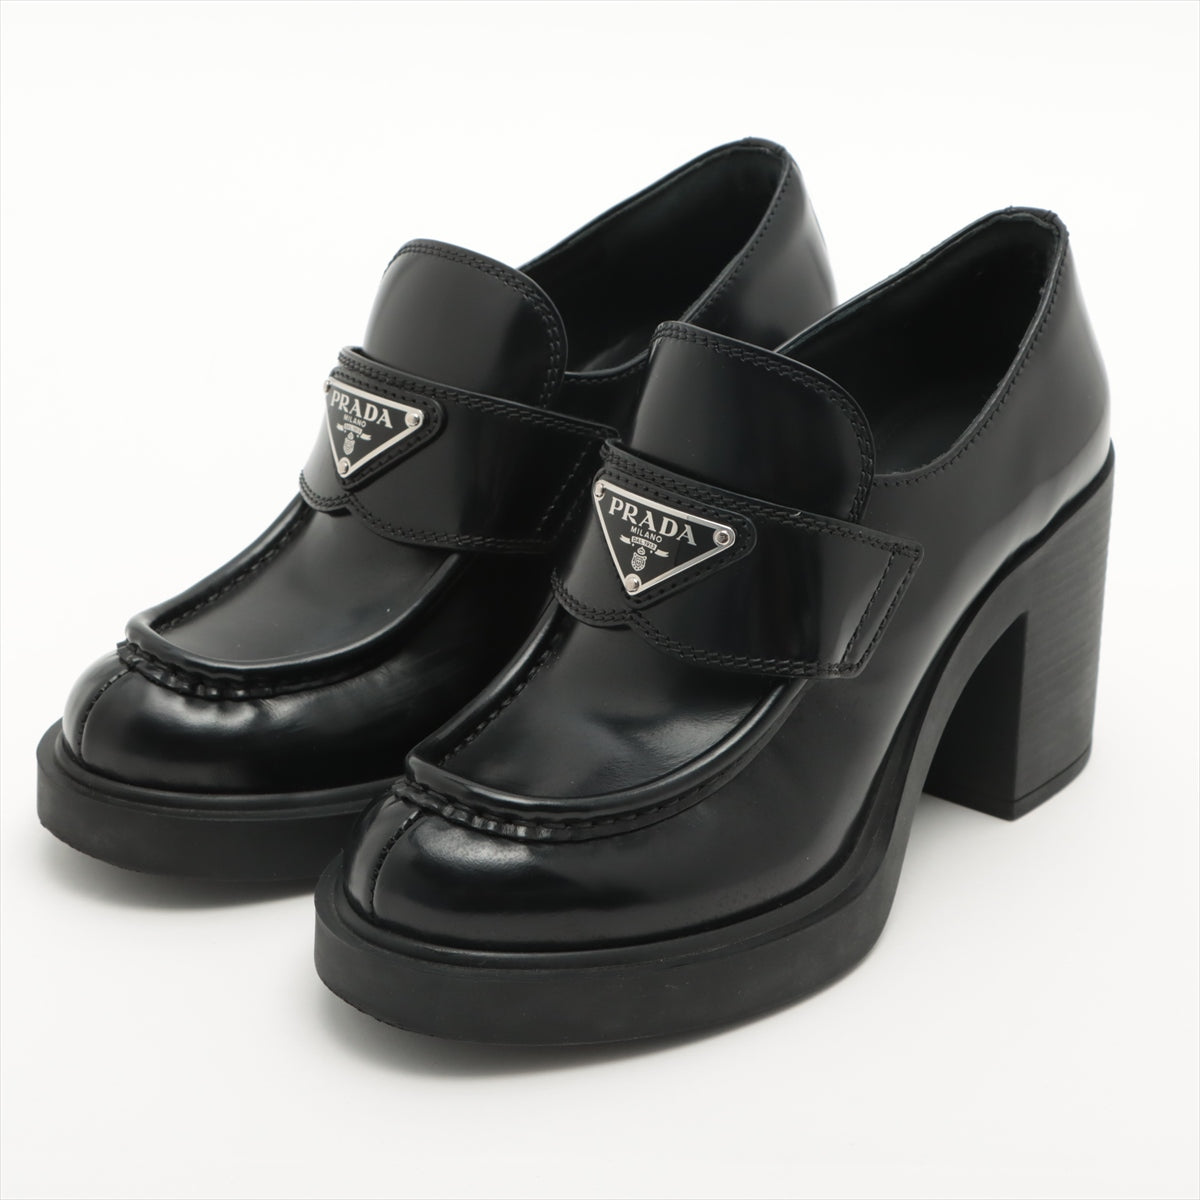 Prada Leather Pumps 36 Ladies' Black box There is a bag